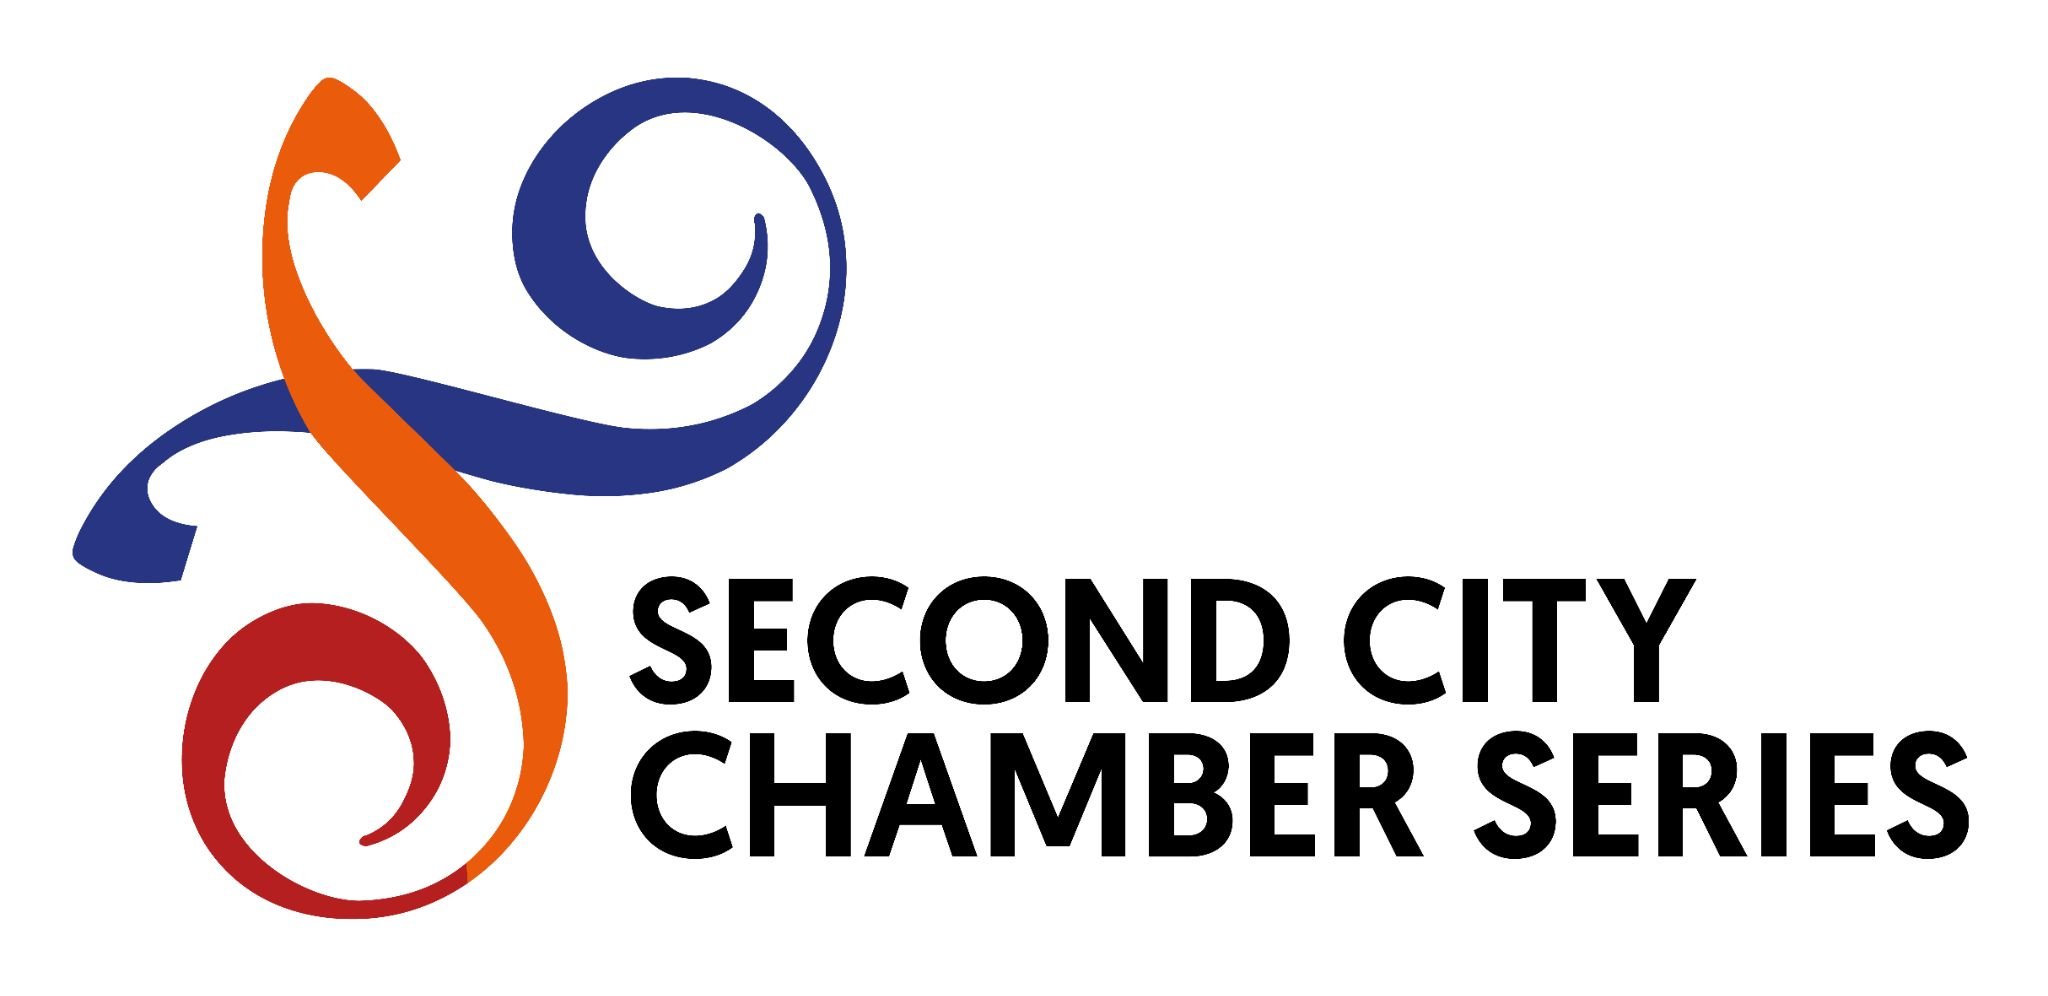 Second City Chamber Series